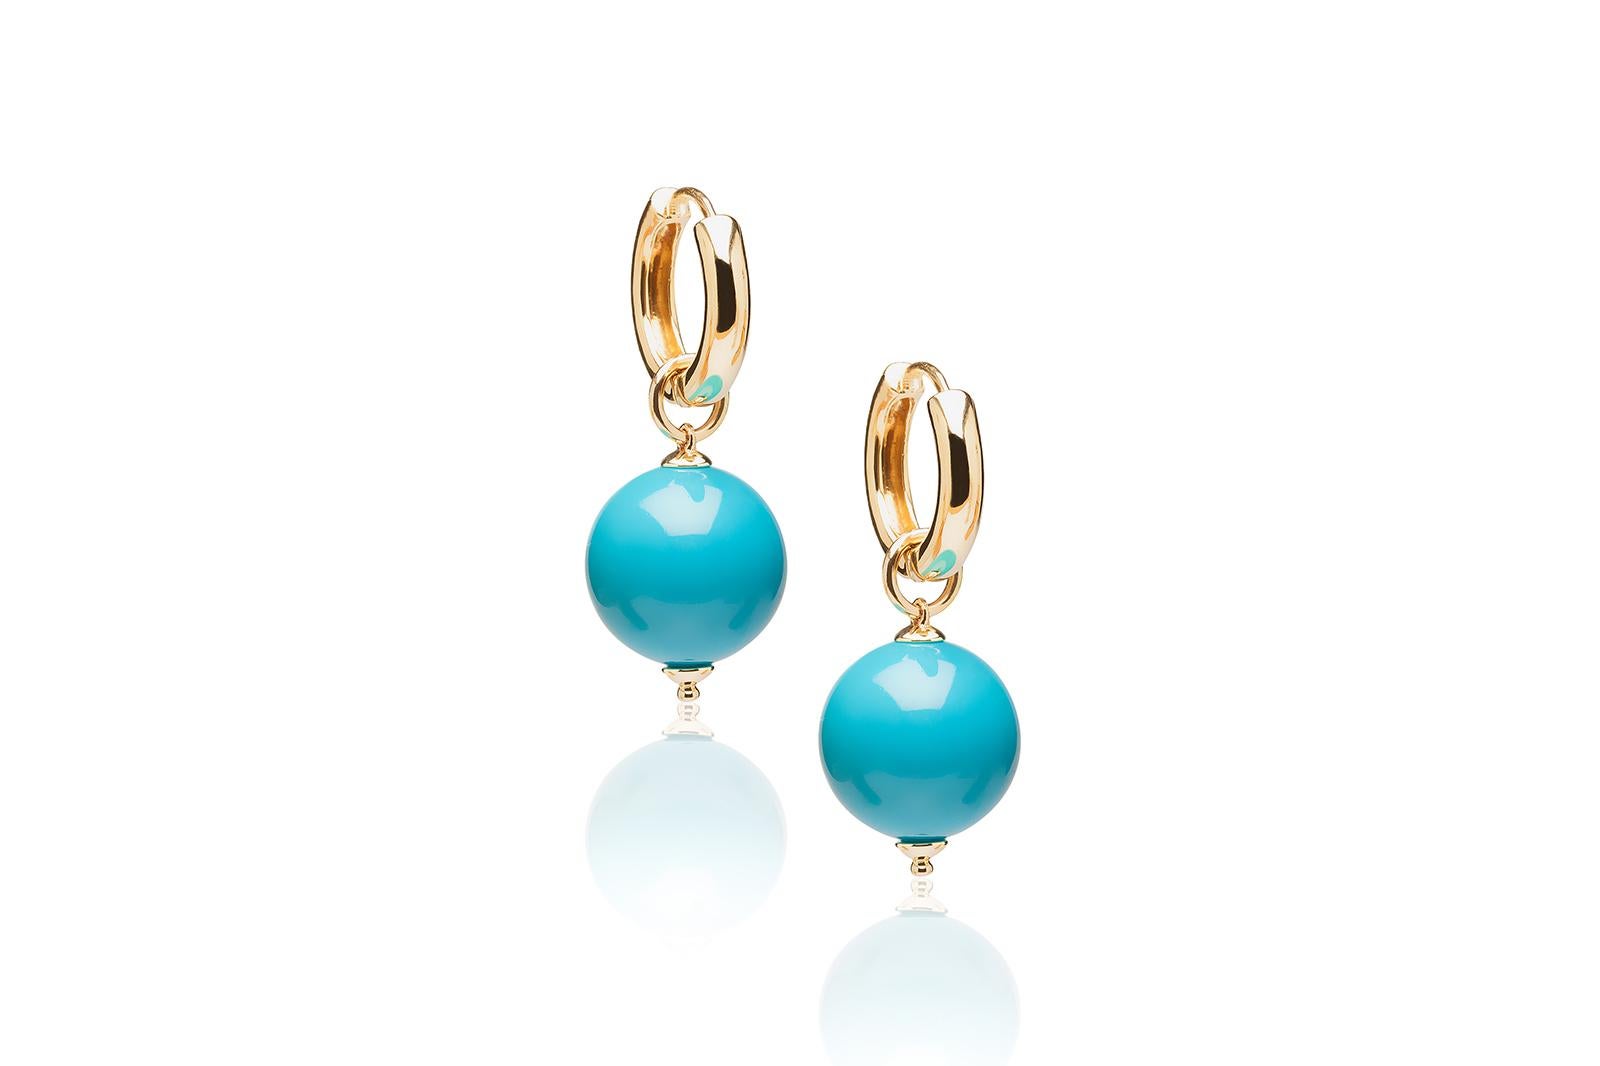 These Turquoise Plain Round Bead Double Loop Earrings in 18K Yellow Gold are an exquisite pieces from the 'Beyond' Collection. Crafted with meticulous attention to detail, these earrings feature stunning turquoise beads in lustrous 18K yellow gold